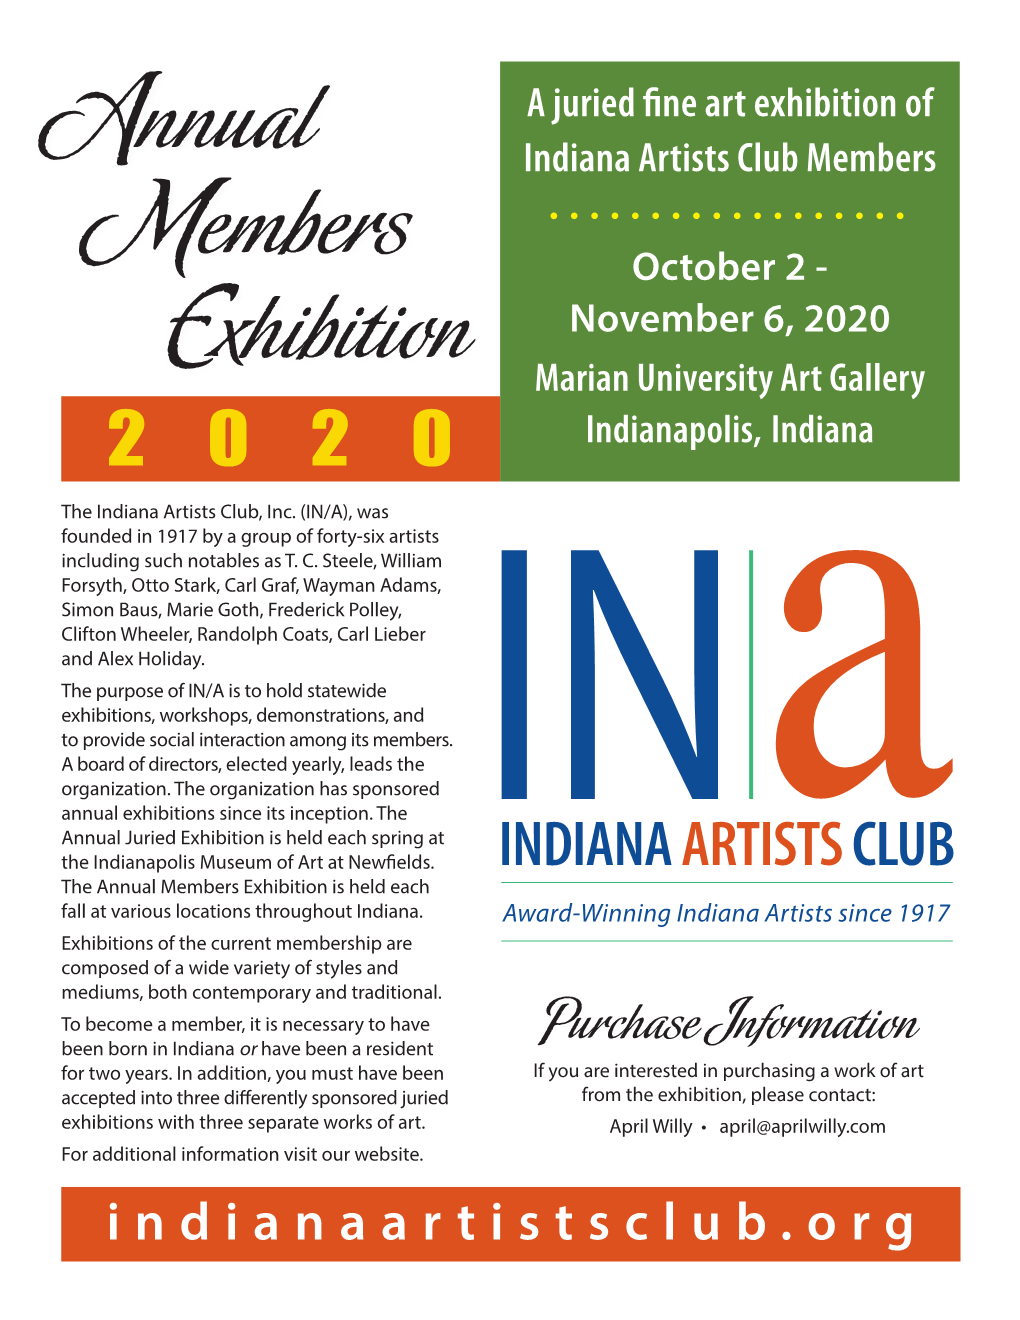 Annual Members Exhibition Is Held Each Fall at Various Locations Throughout Indiana